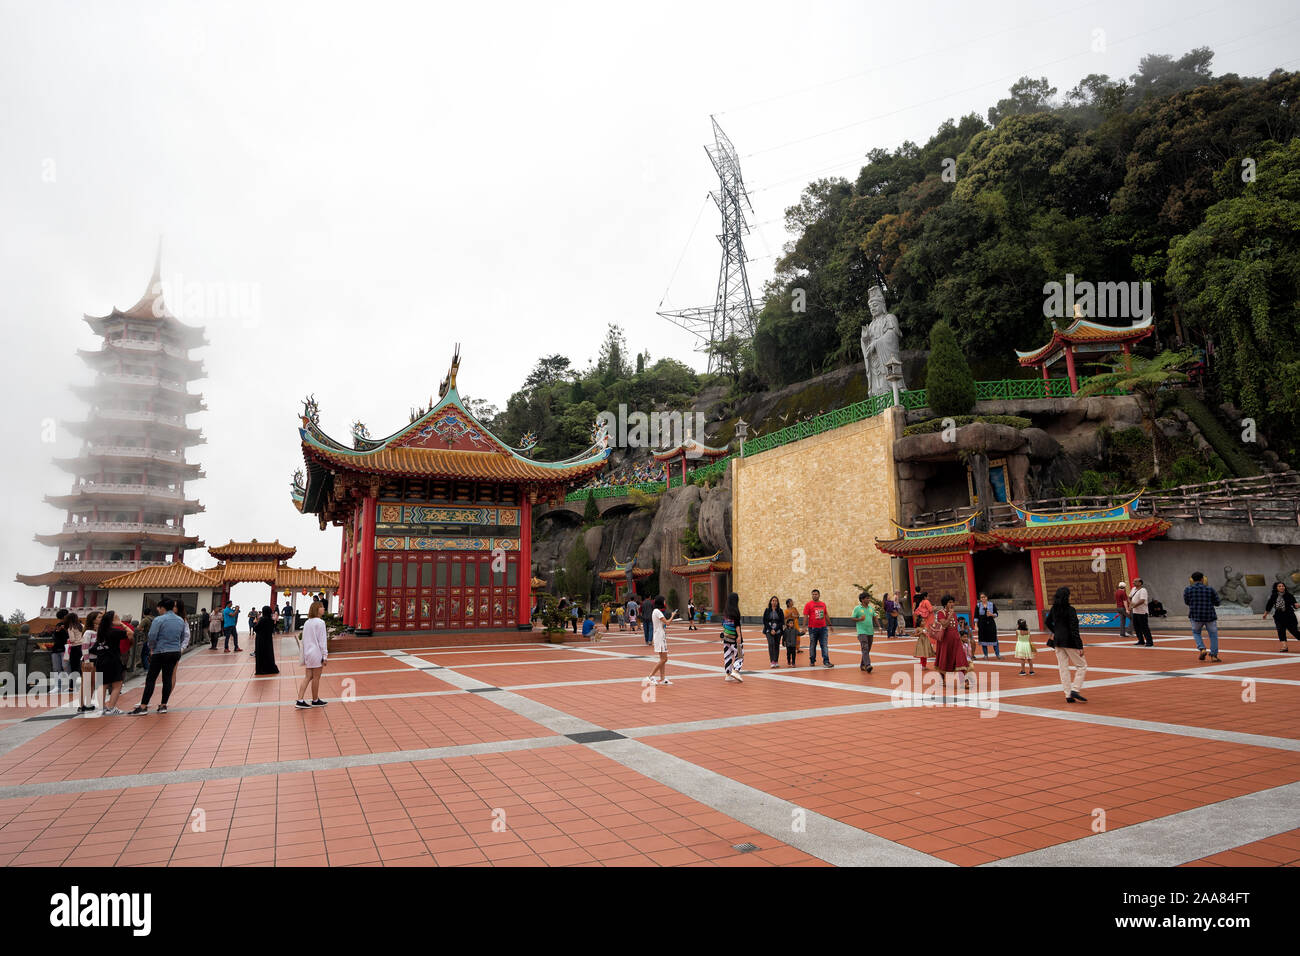 Genting Highland, Malaysia - Nov 20, 2018: Unidentified tourists visiting the scenic site of foggy Chin Swee Temple, Genting Highland, Malaysia - The Stock Photo